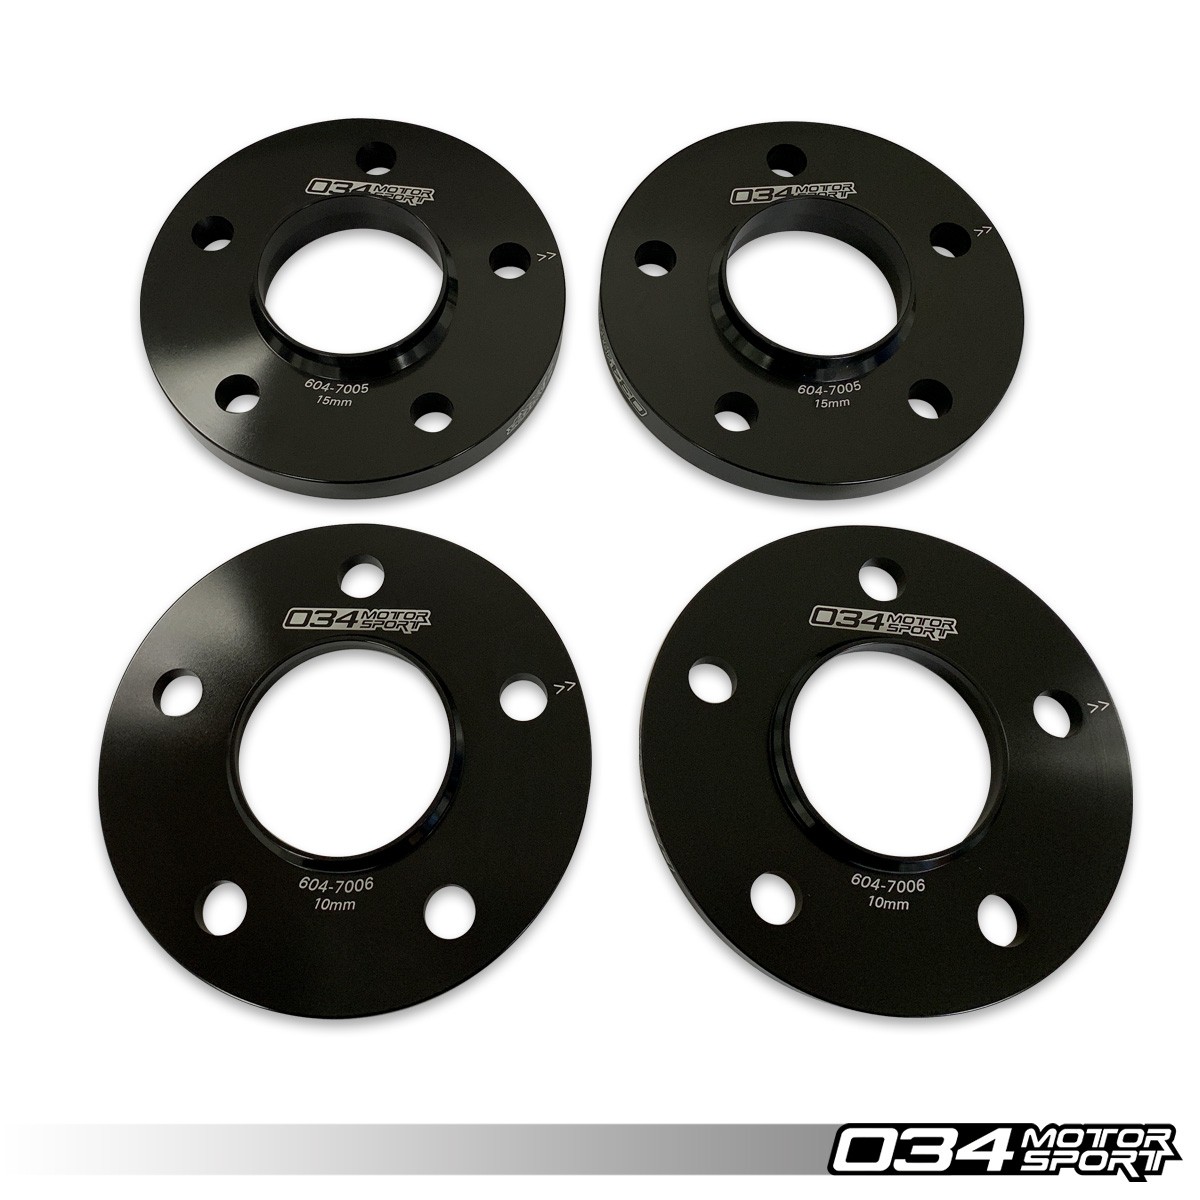 50mm 5 Lug Wheel Spacers for Audi A4 S4 RS4 A5 S5 RS5 A6 S6 Hubcentric 5x112 4 